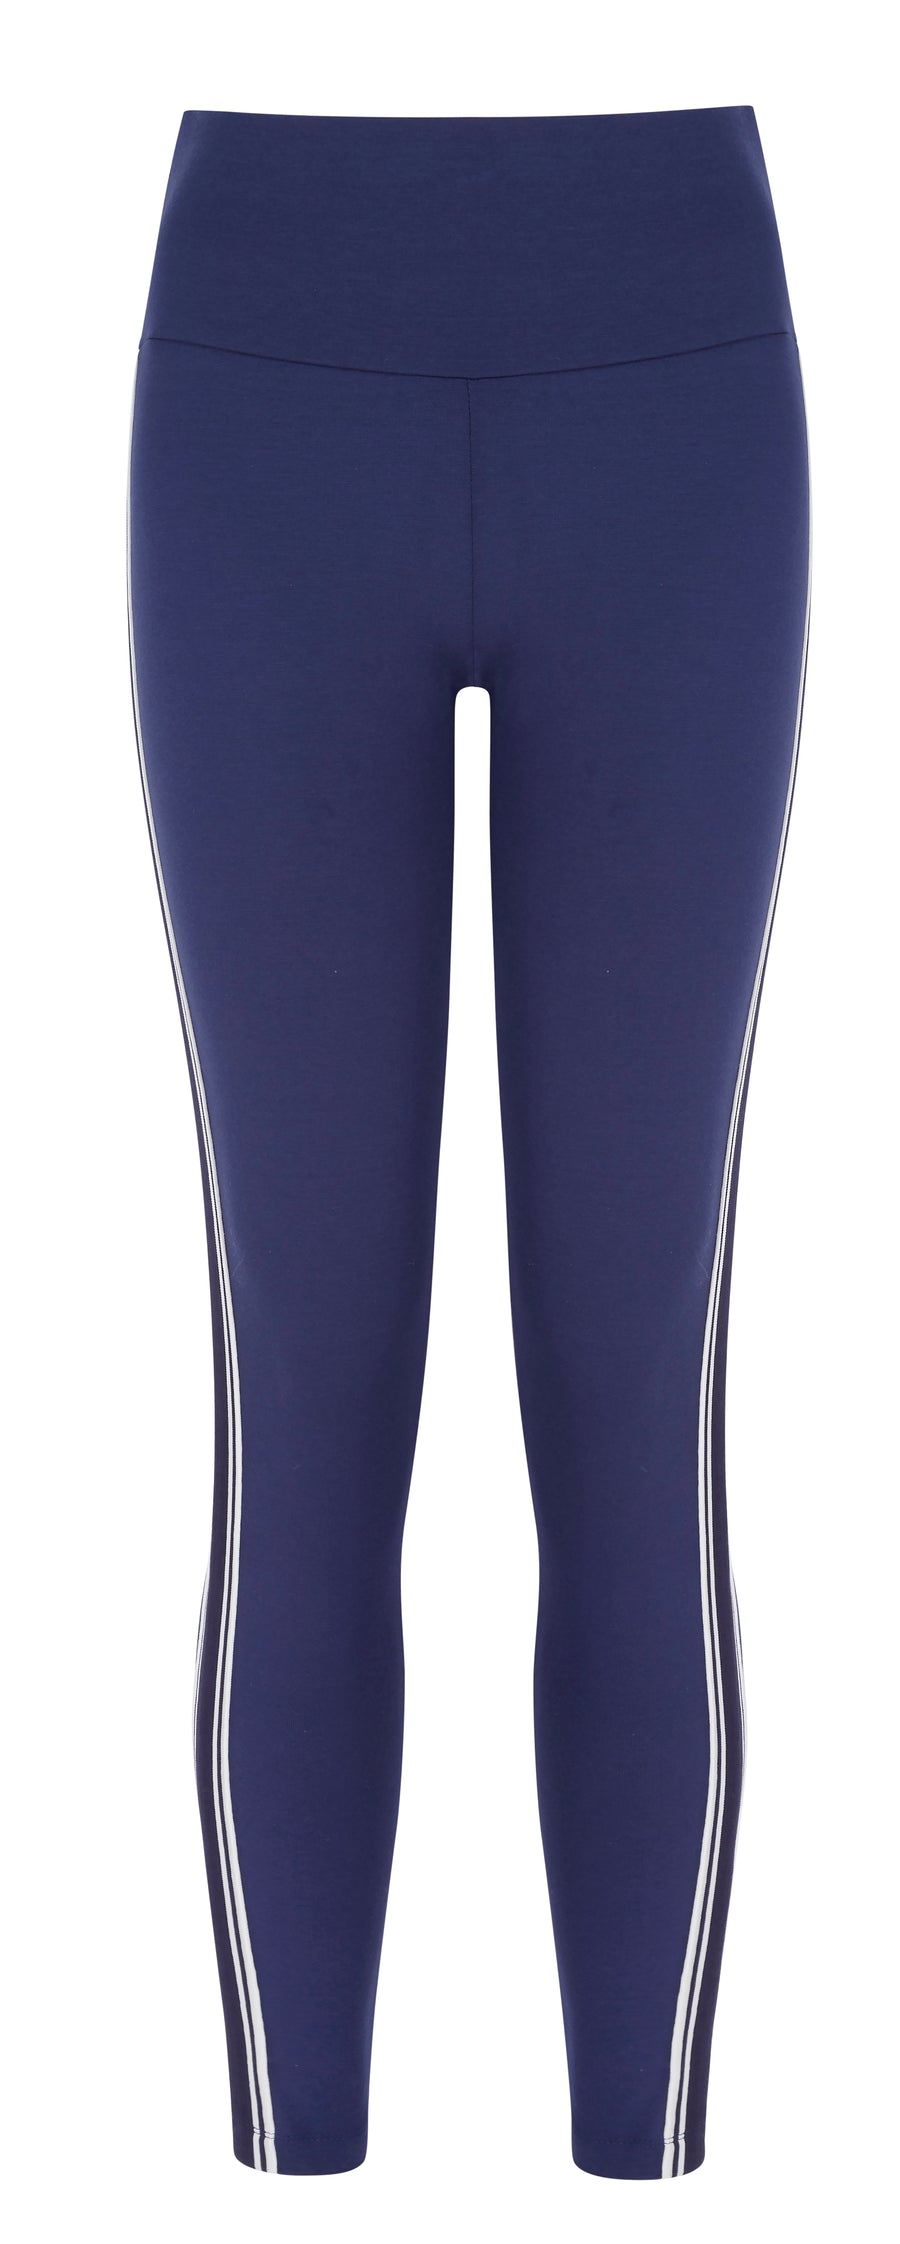 Flow with it Leggings - Midnight